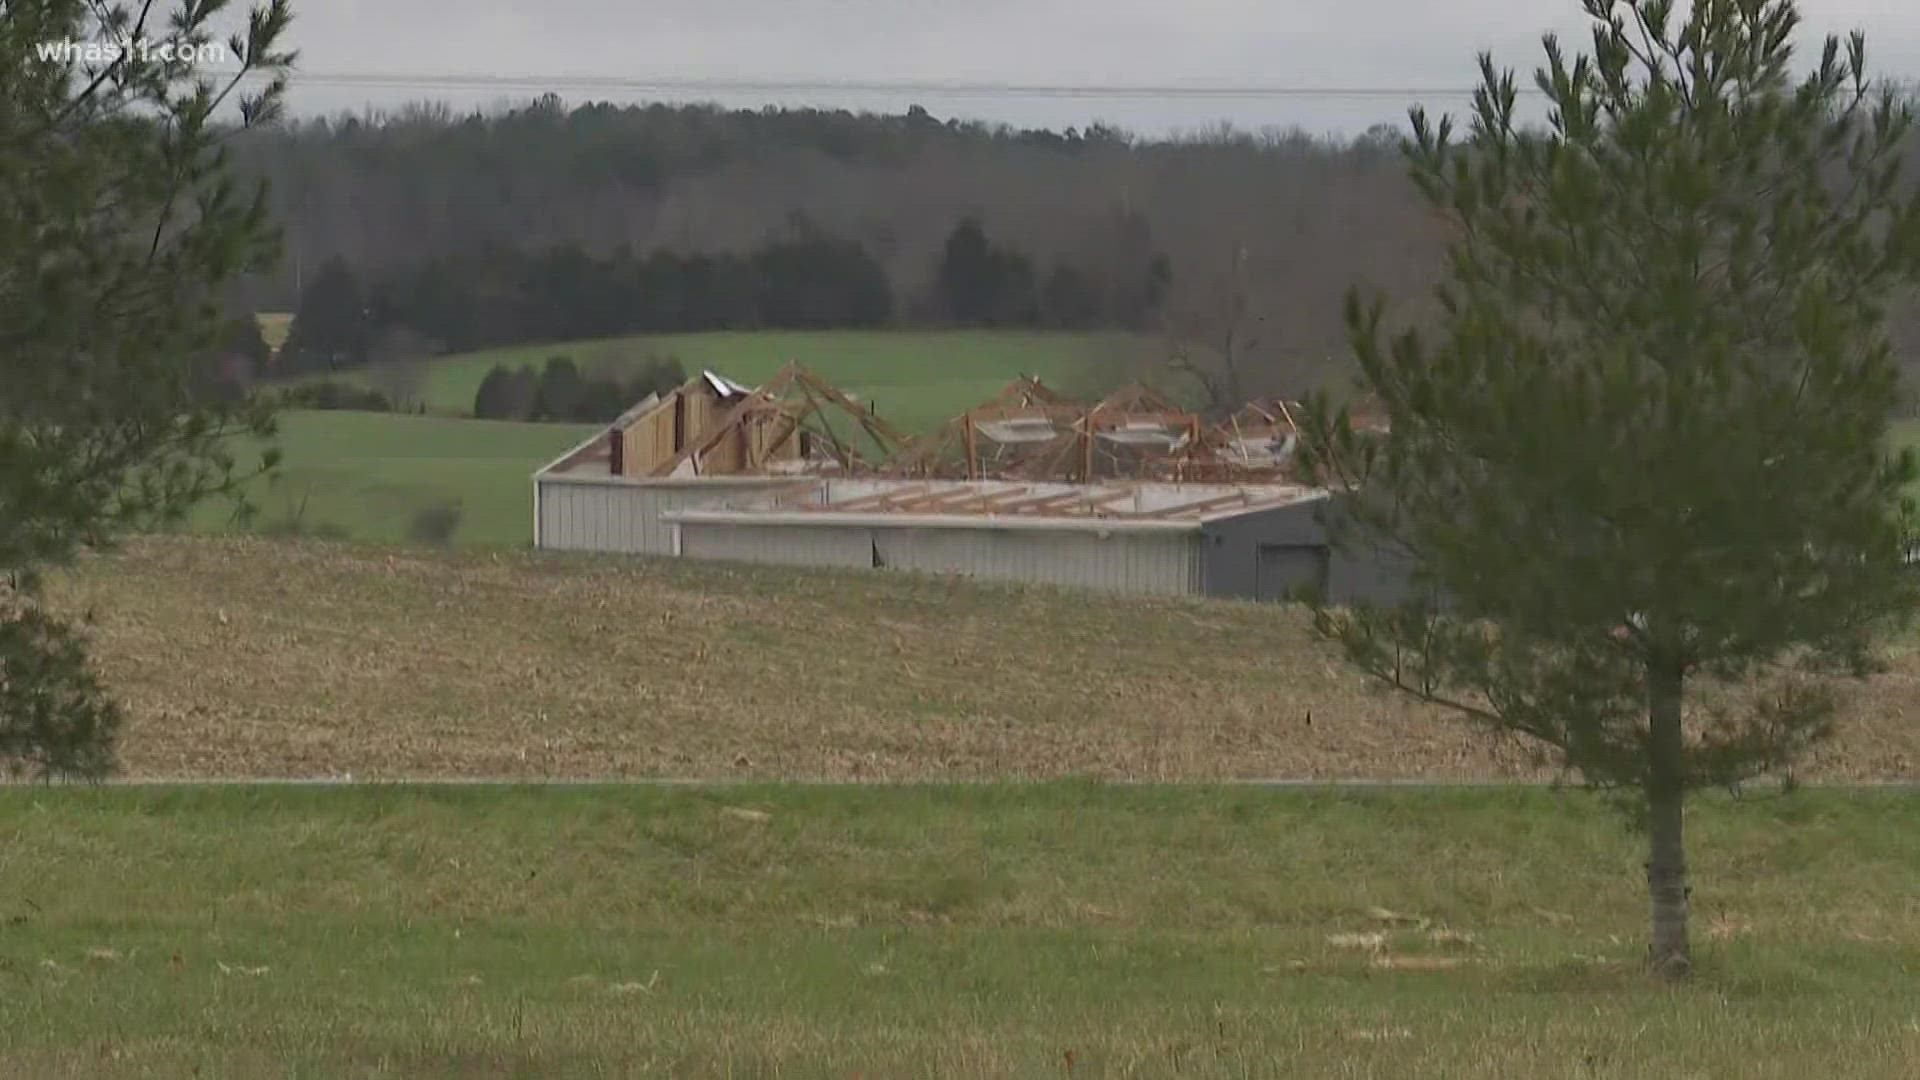 Jeff Maysey said the storms ripped the roof off his barn in Hardin County, damaged part of a cabin, and tossed a heavy, 12-foot utility trailer half a mile away.